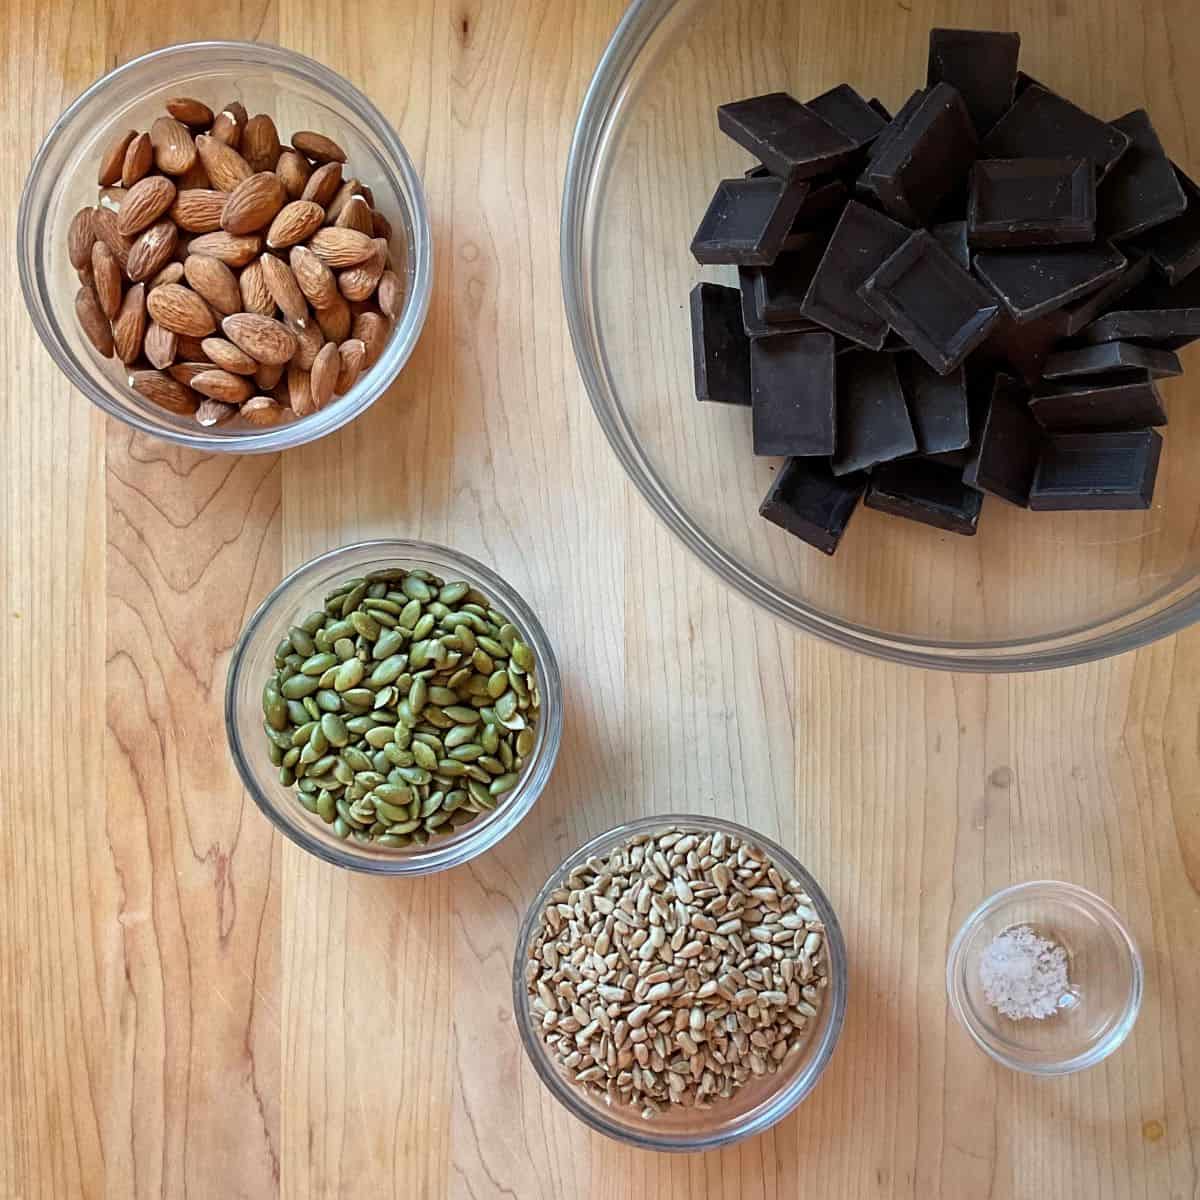 Ingredients to make chocolate bark with almonds.